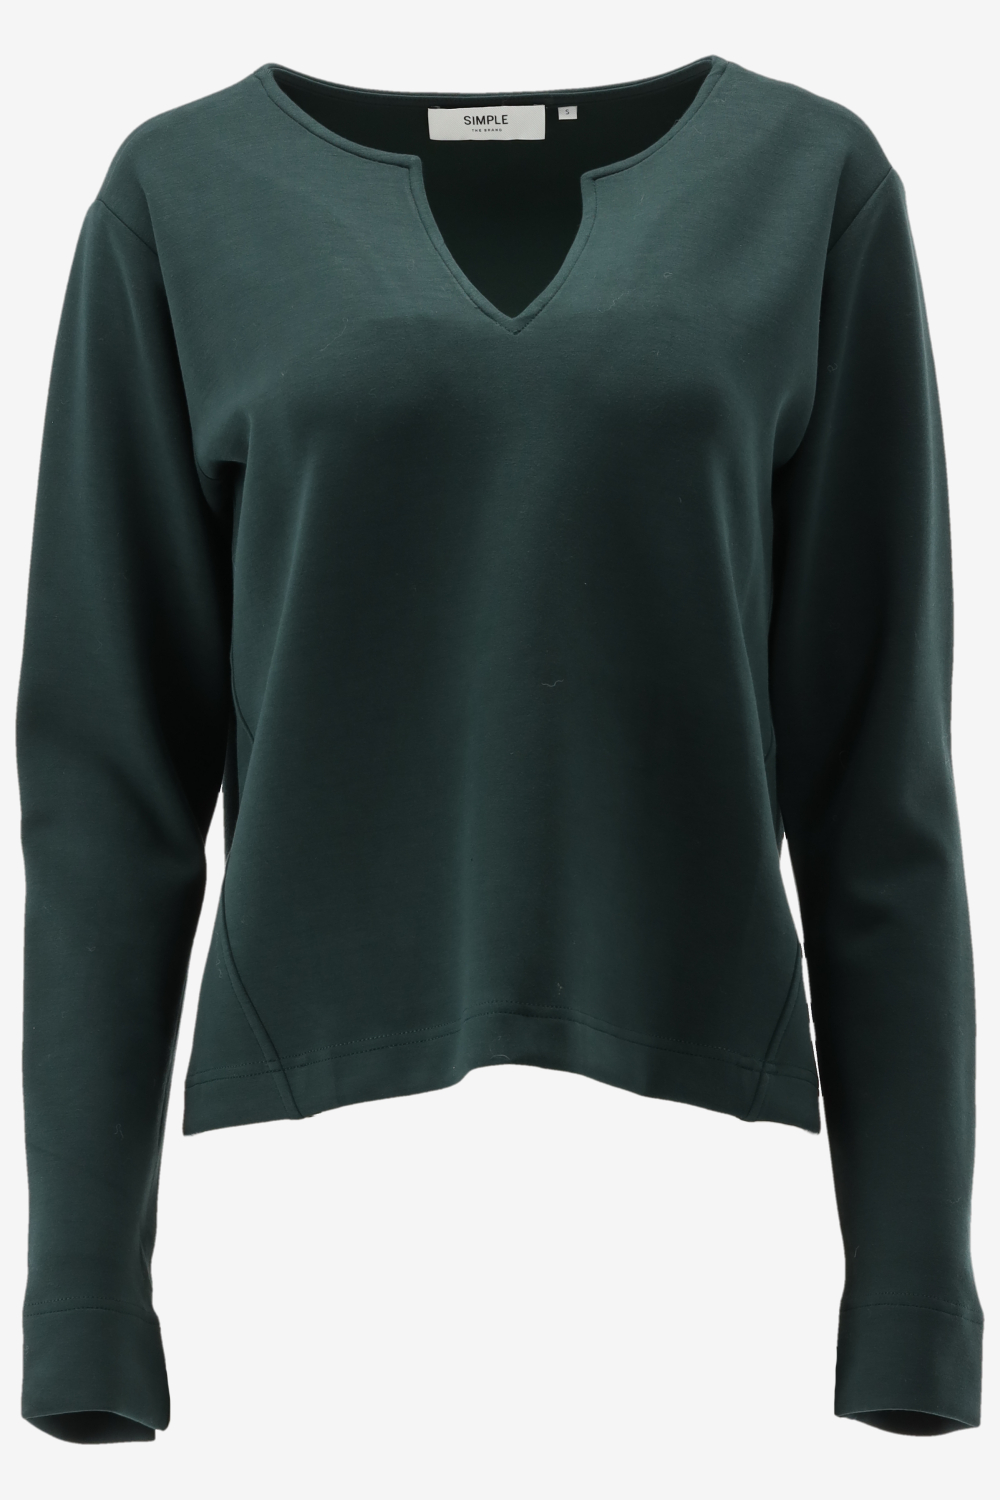 Simple Dames Tops & T-shirts Maddy Jer-modal-22-3 - Groen - Maat S